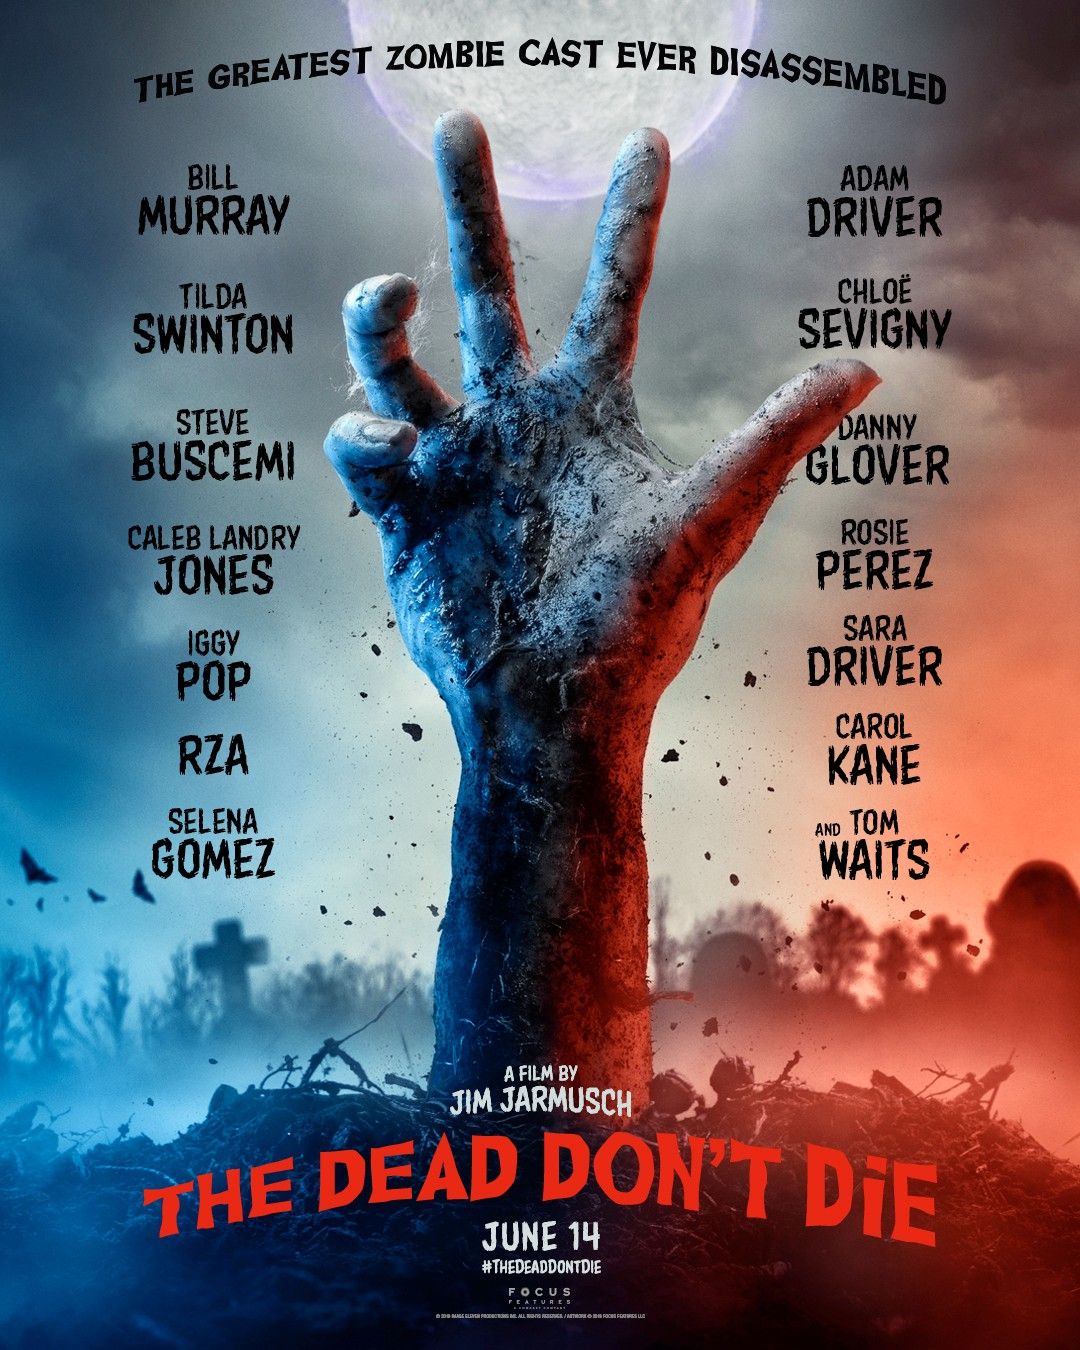 The Dead Dont Die poster